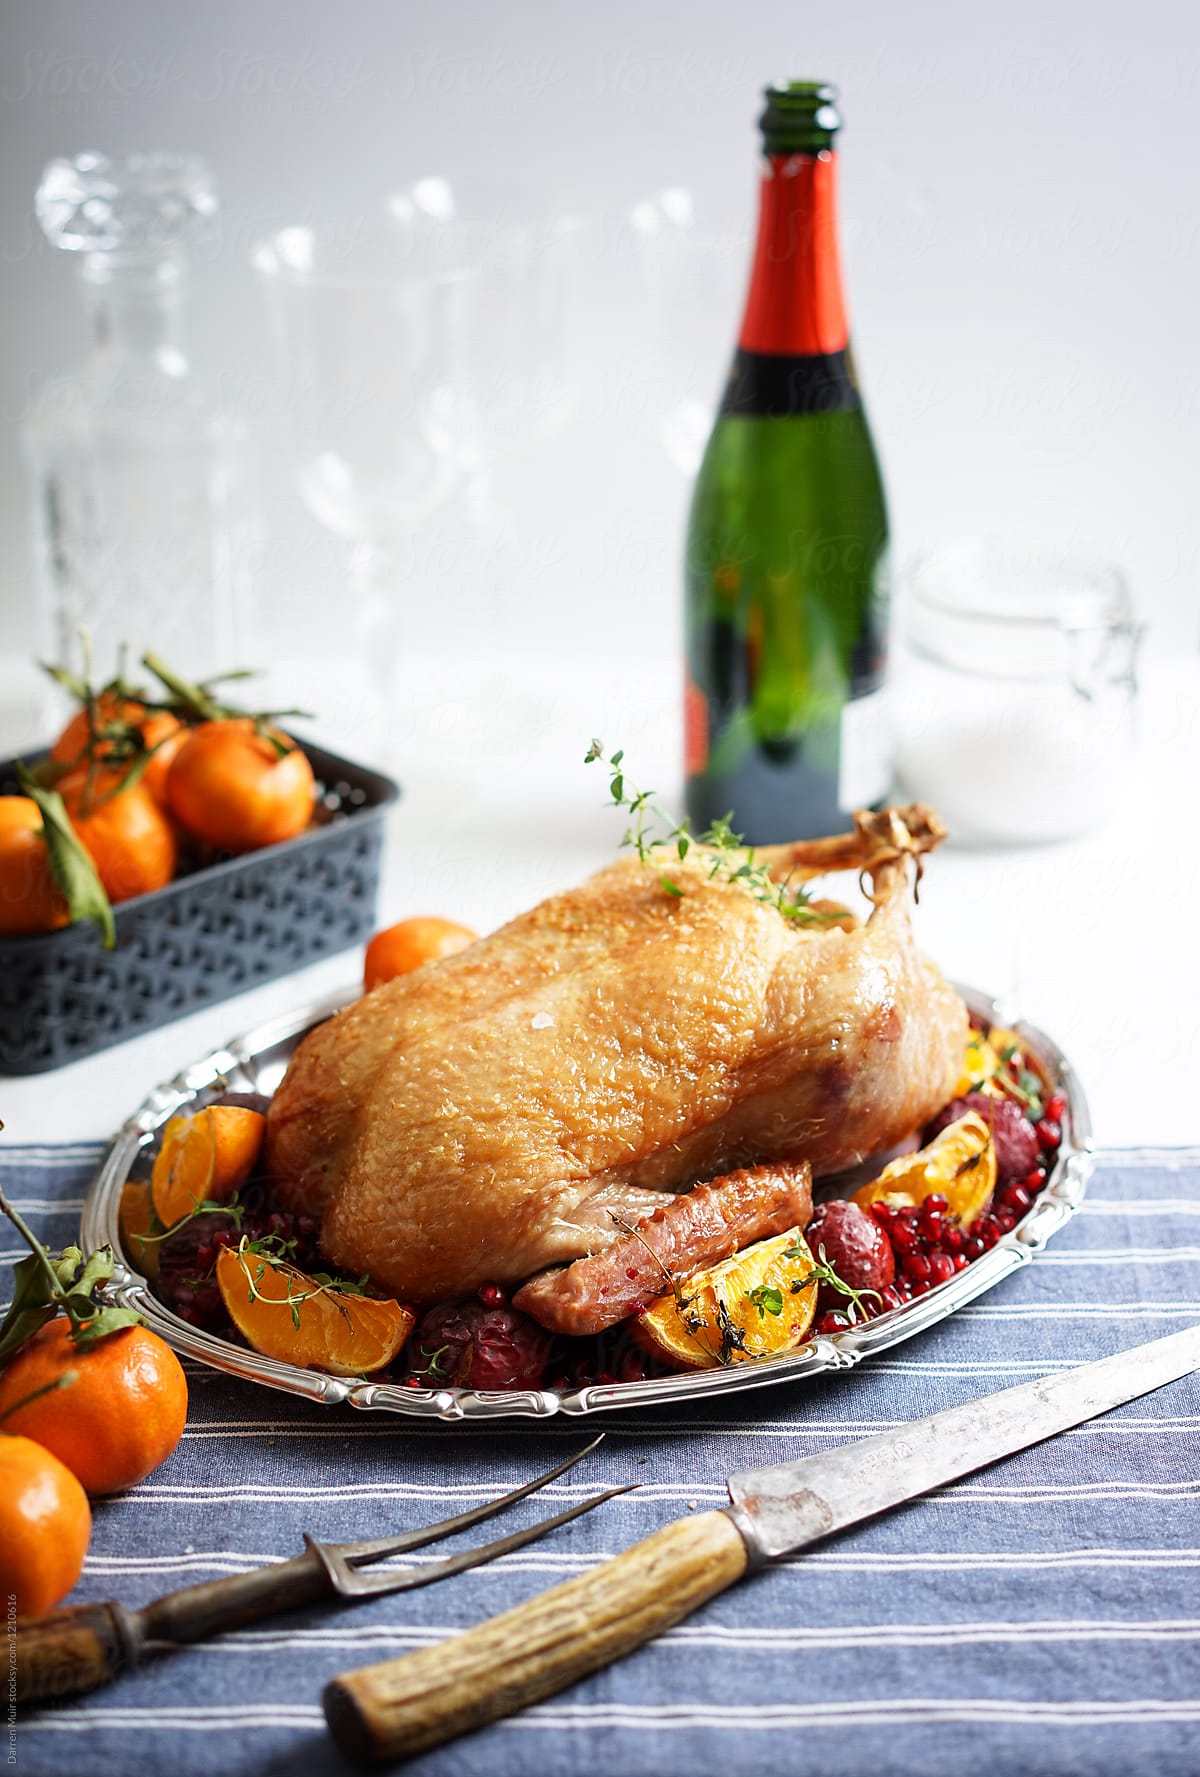 Roast duck with fruits on a salver on a table.